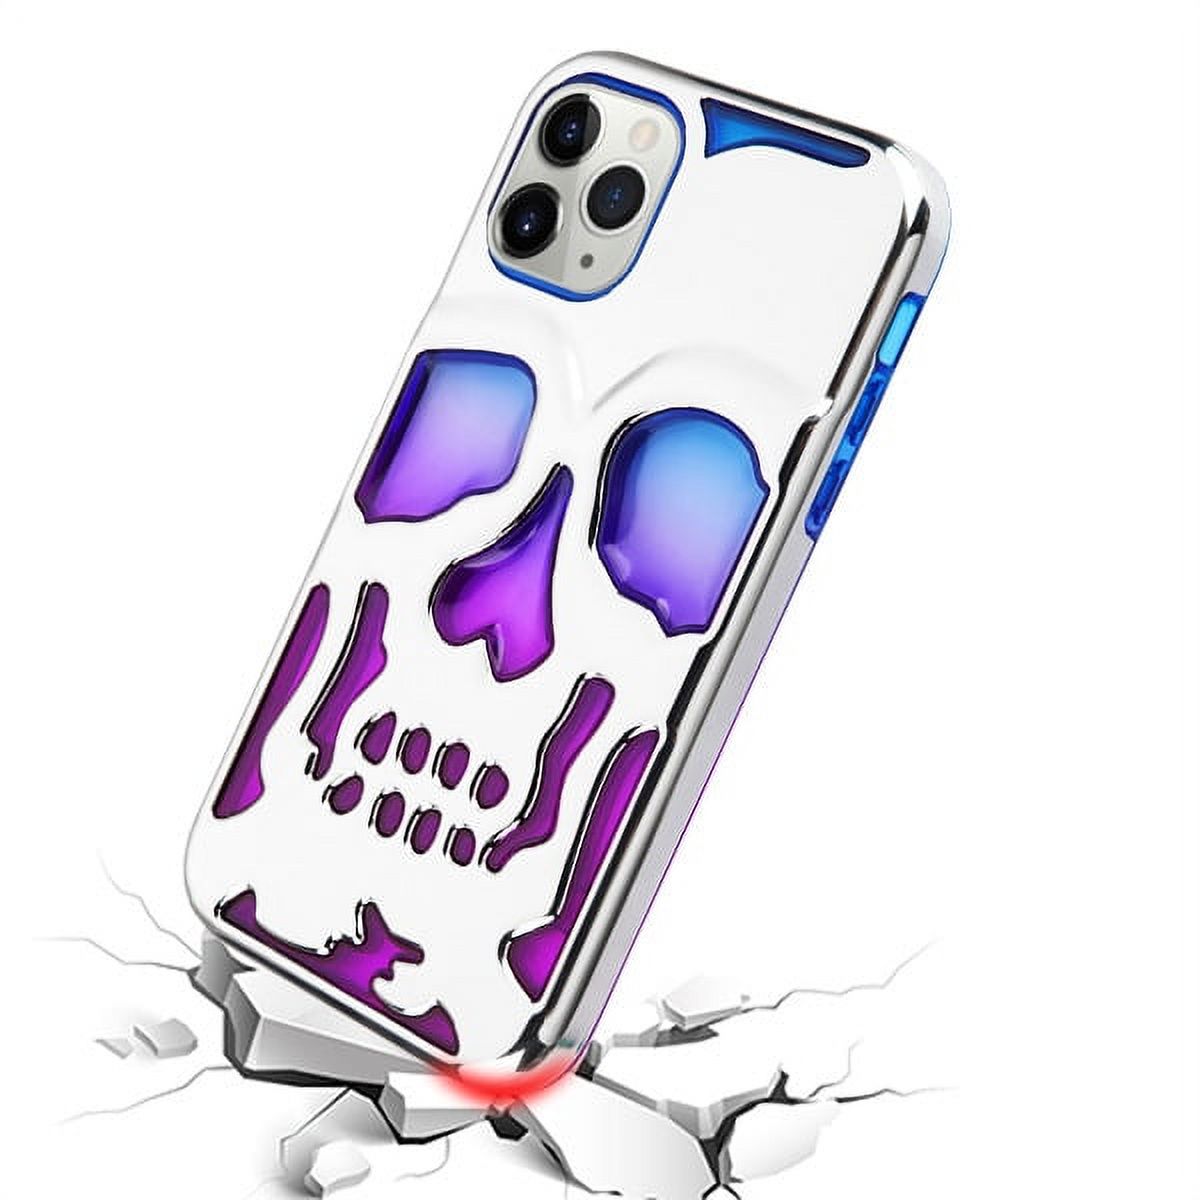 Apple iPhone 11 PRO Phone Case Tuff Hybrid Skeleton Shockproof Armor Impact Rubber Dual Layer Hard Soft TPU Rugged Protective Cover SKULL Blue Purple Silver Plating Phone Cover for Apple iPhone 11 Pro - image 3 of 5